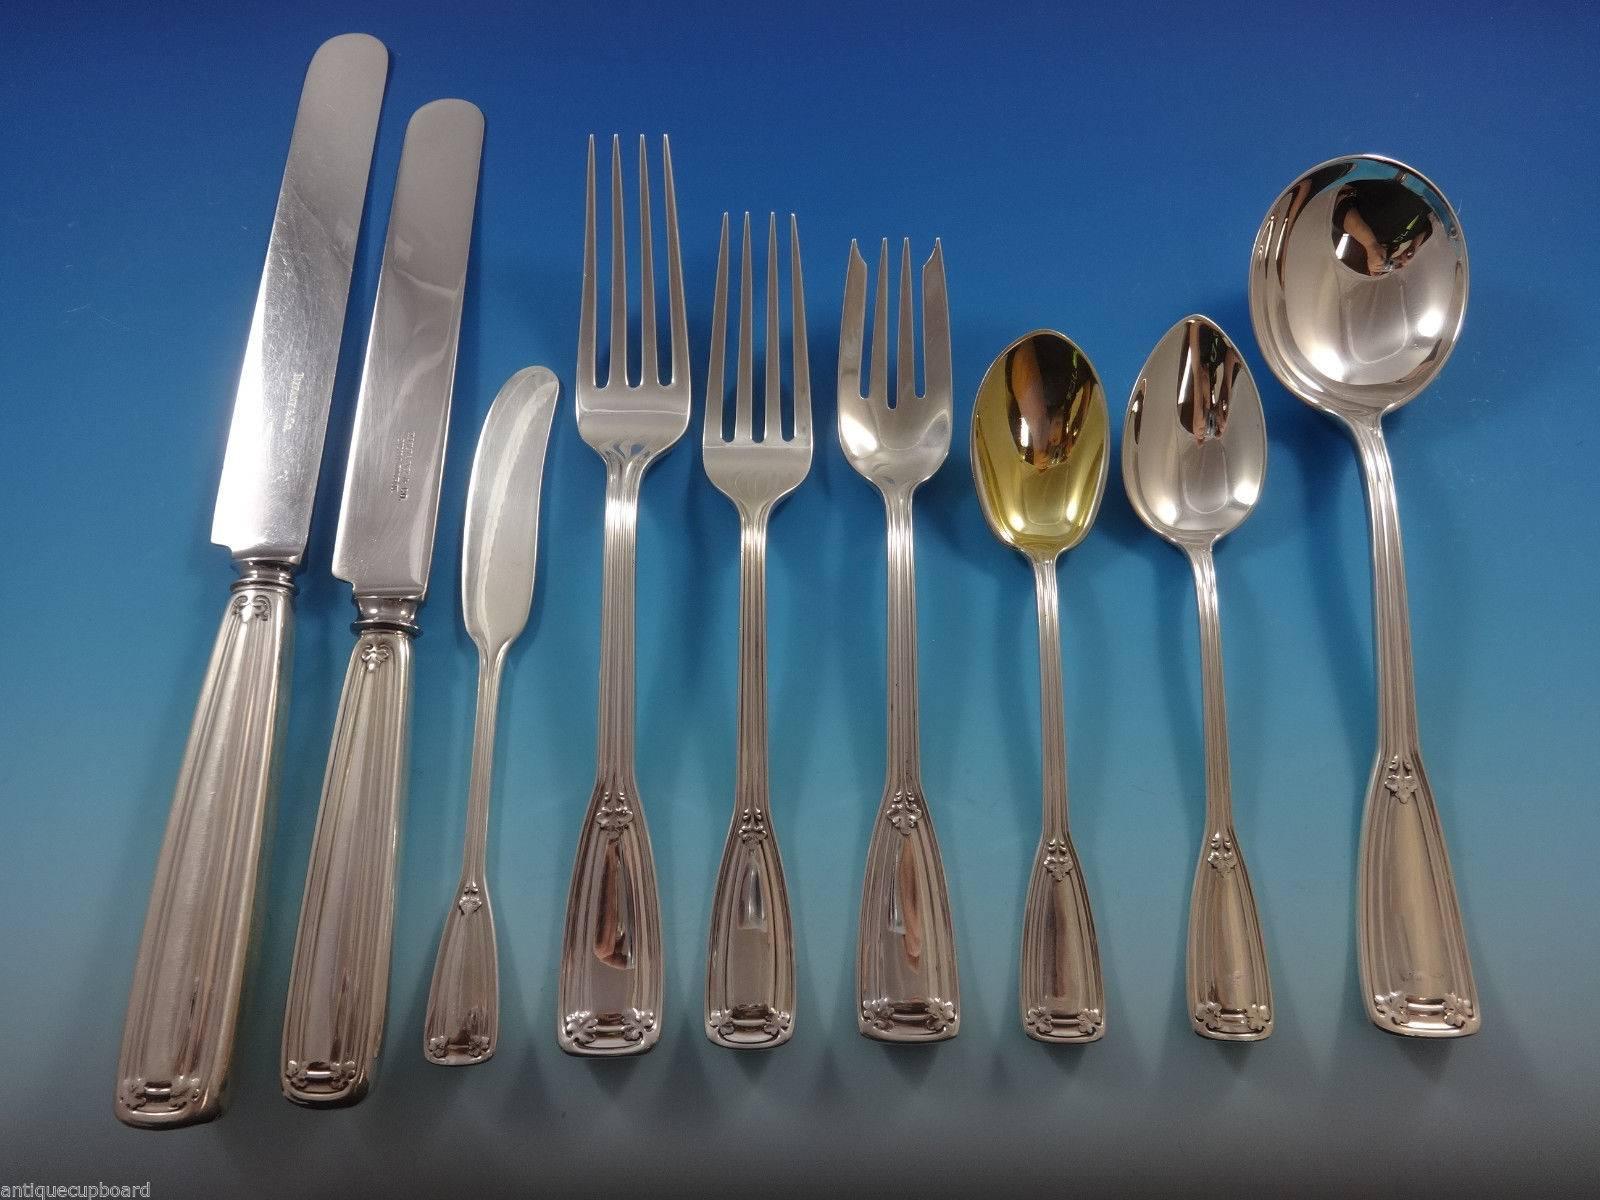 Saint Dunstan by Tiffany & Co. sterling silver dinner flatware set - 66 pieces. This set includes:

Six dinner size knives, 10 1/8